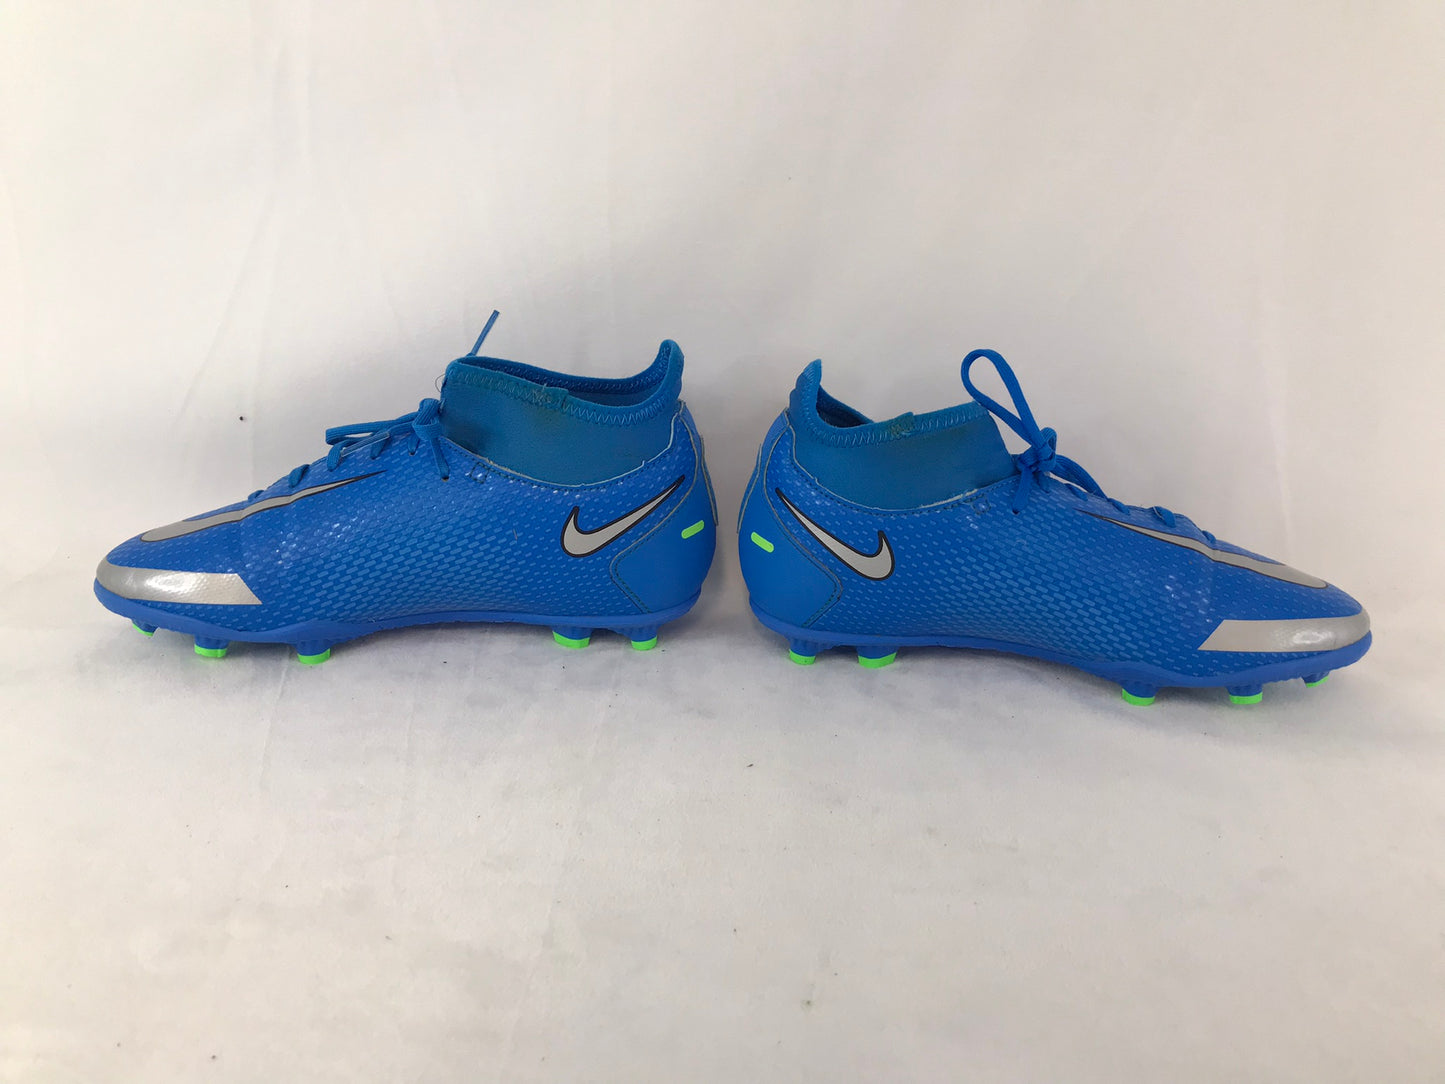 Soccer Shoes Cleats Child Size 5.5 Youth  Nike Phantom Elite With Slipper Foot Blue Silver Outstanding Quality Retail $279.99